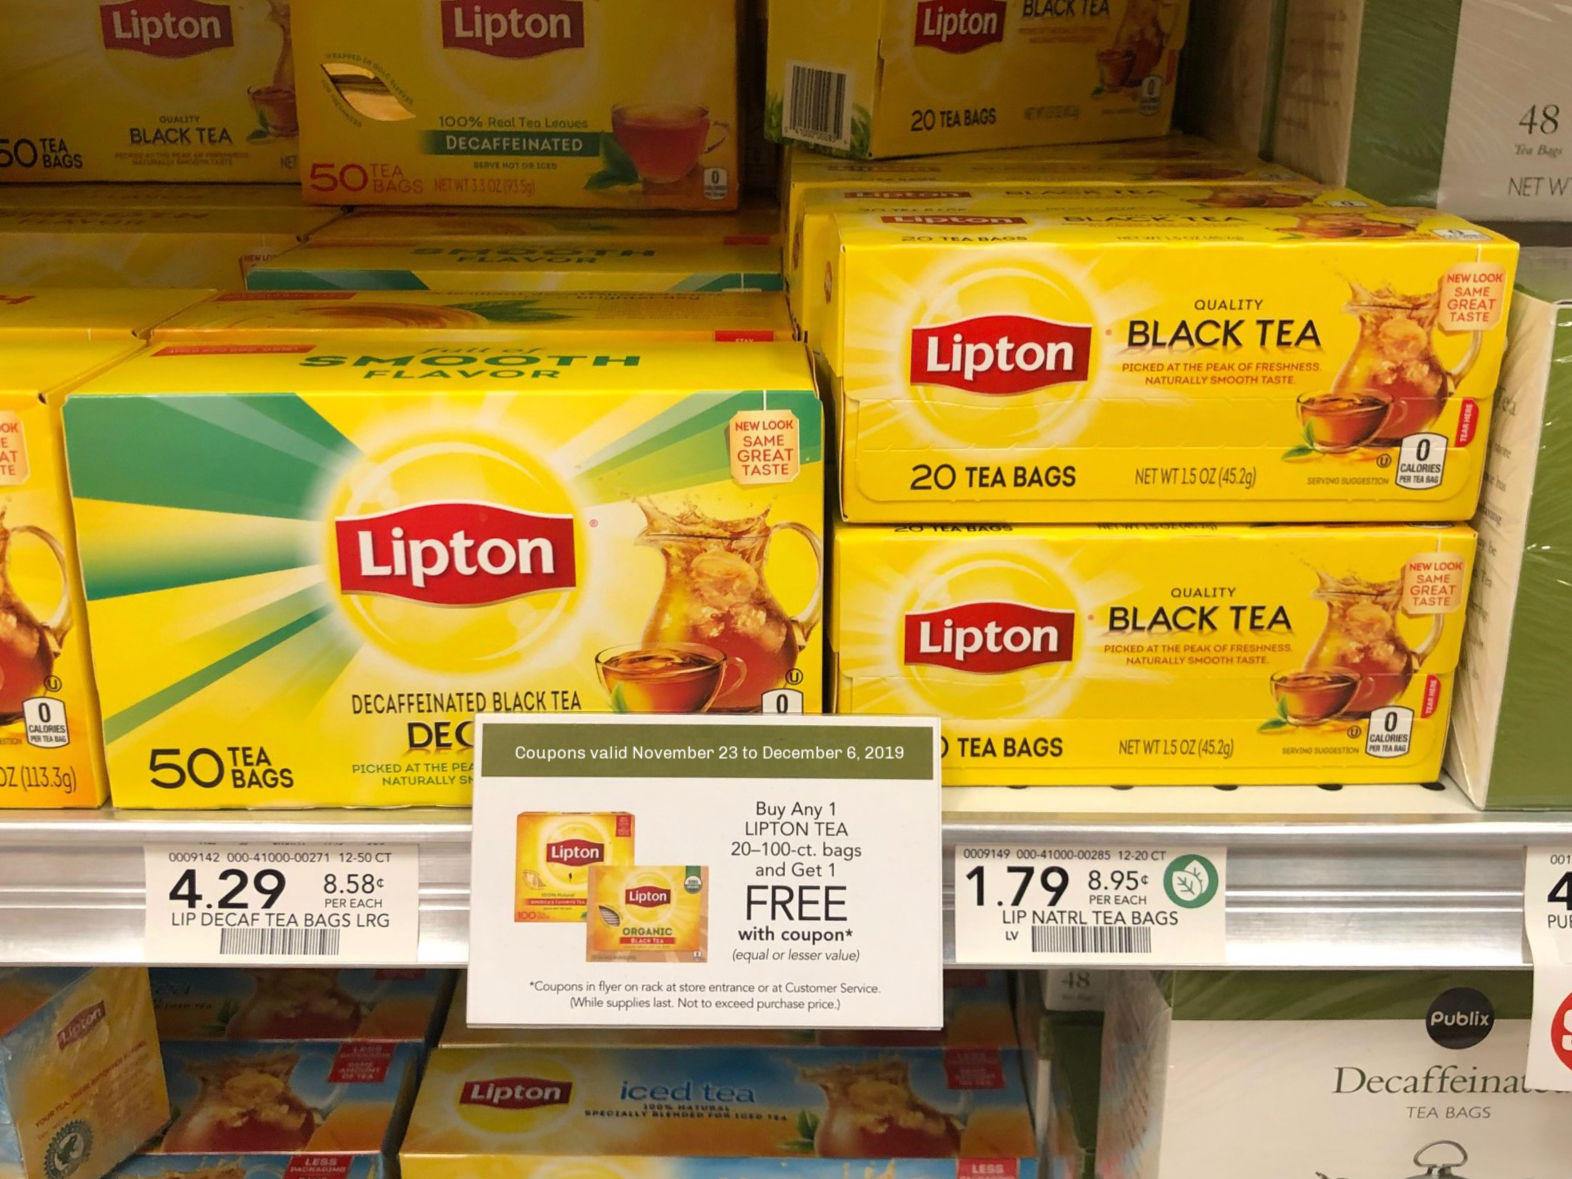 Stock Up On Lipton Tea - Buy One, Get One Free Sale Going On Now At Publix! on I Heart Publix